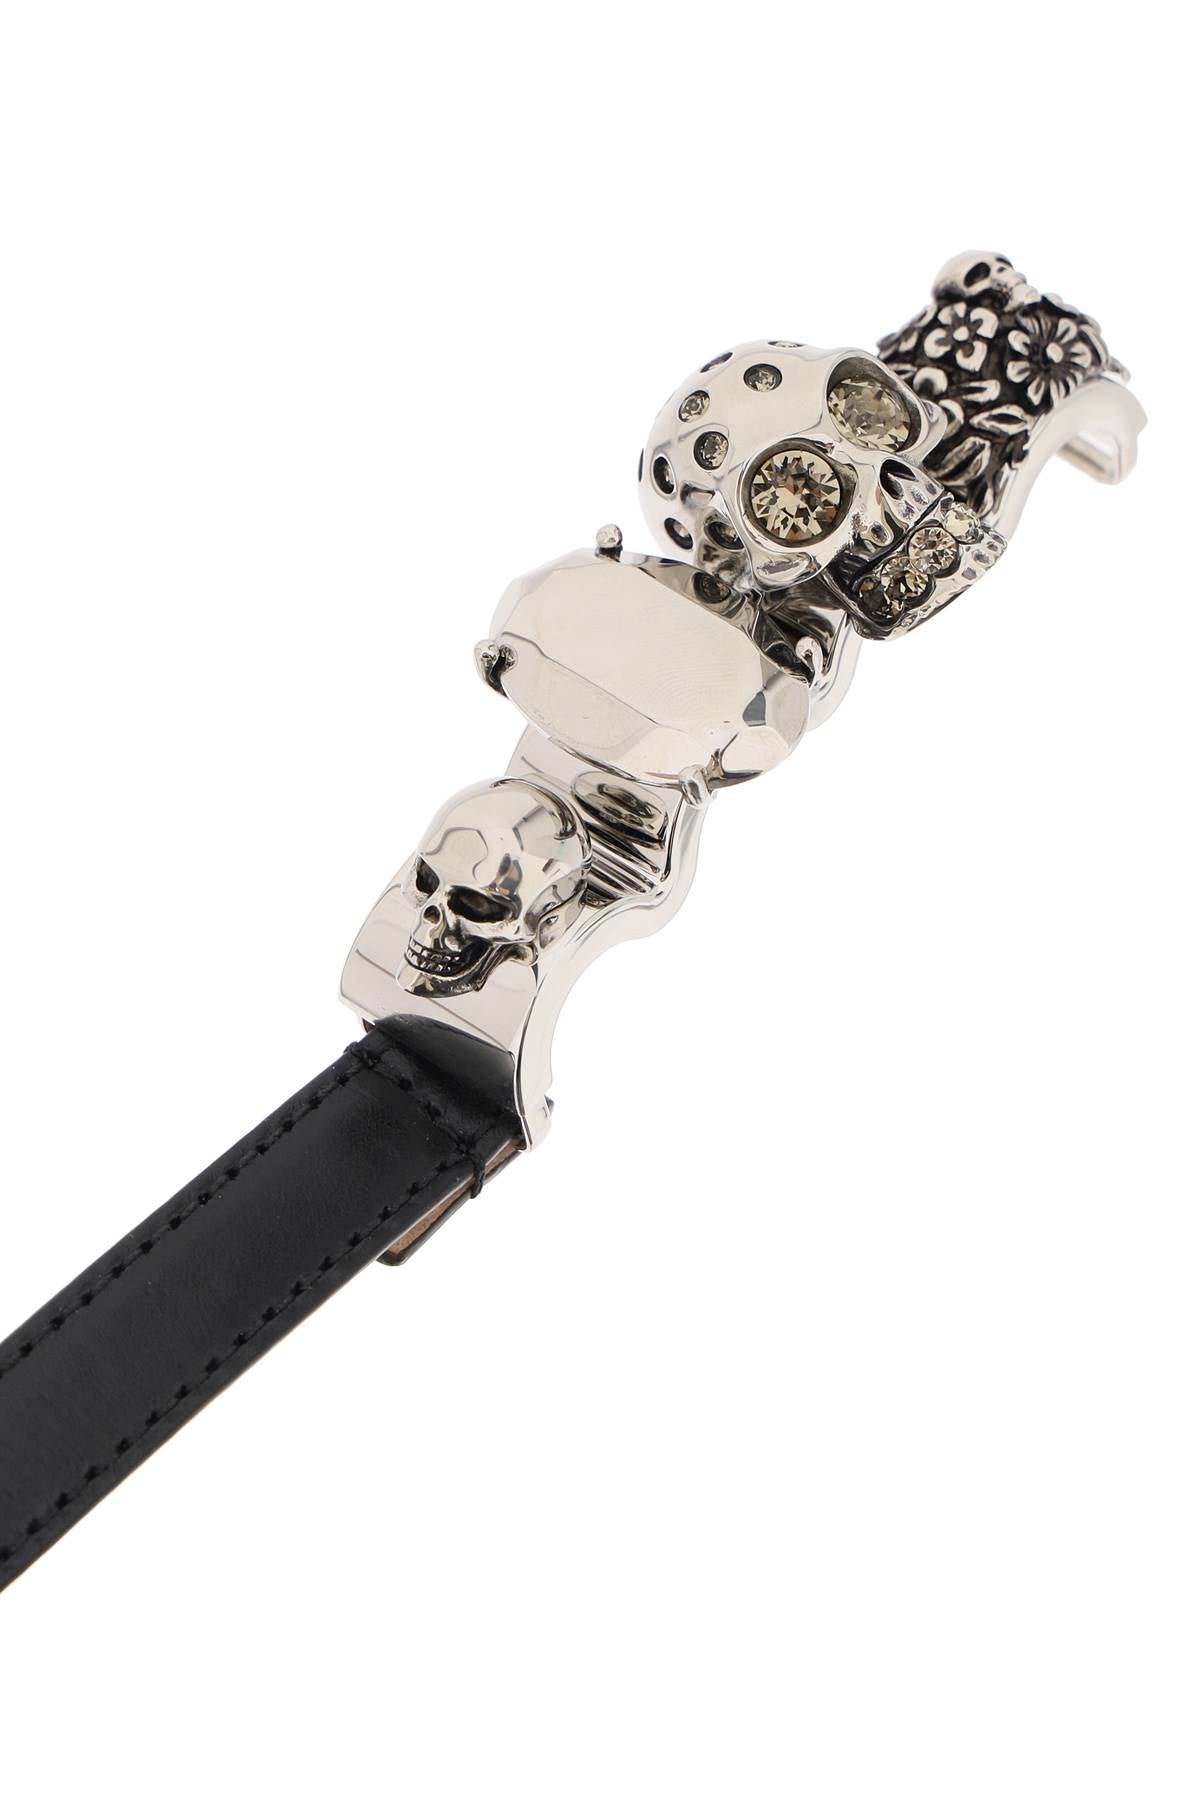 ALEXANDER MCQUEEN Smooth Leather Knuckle Belt with Antique Silver-Finished Buckle